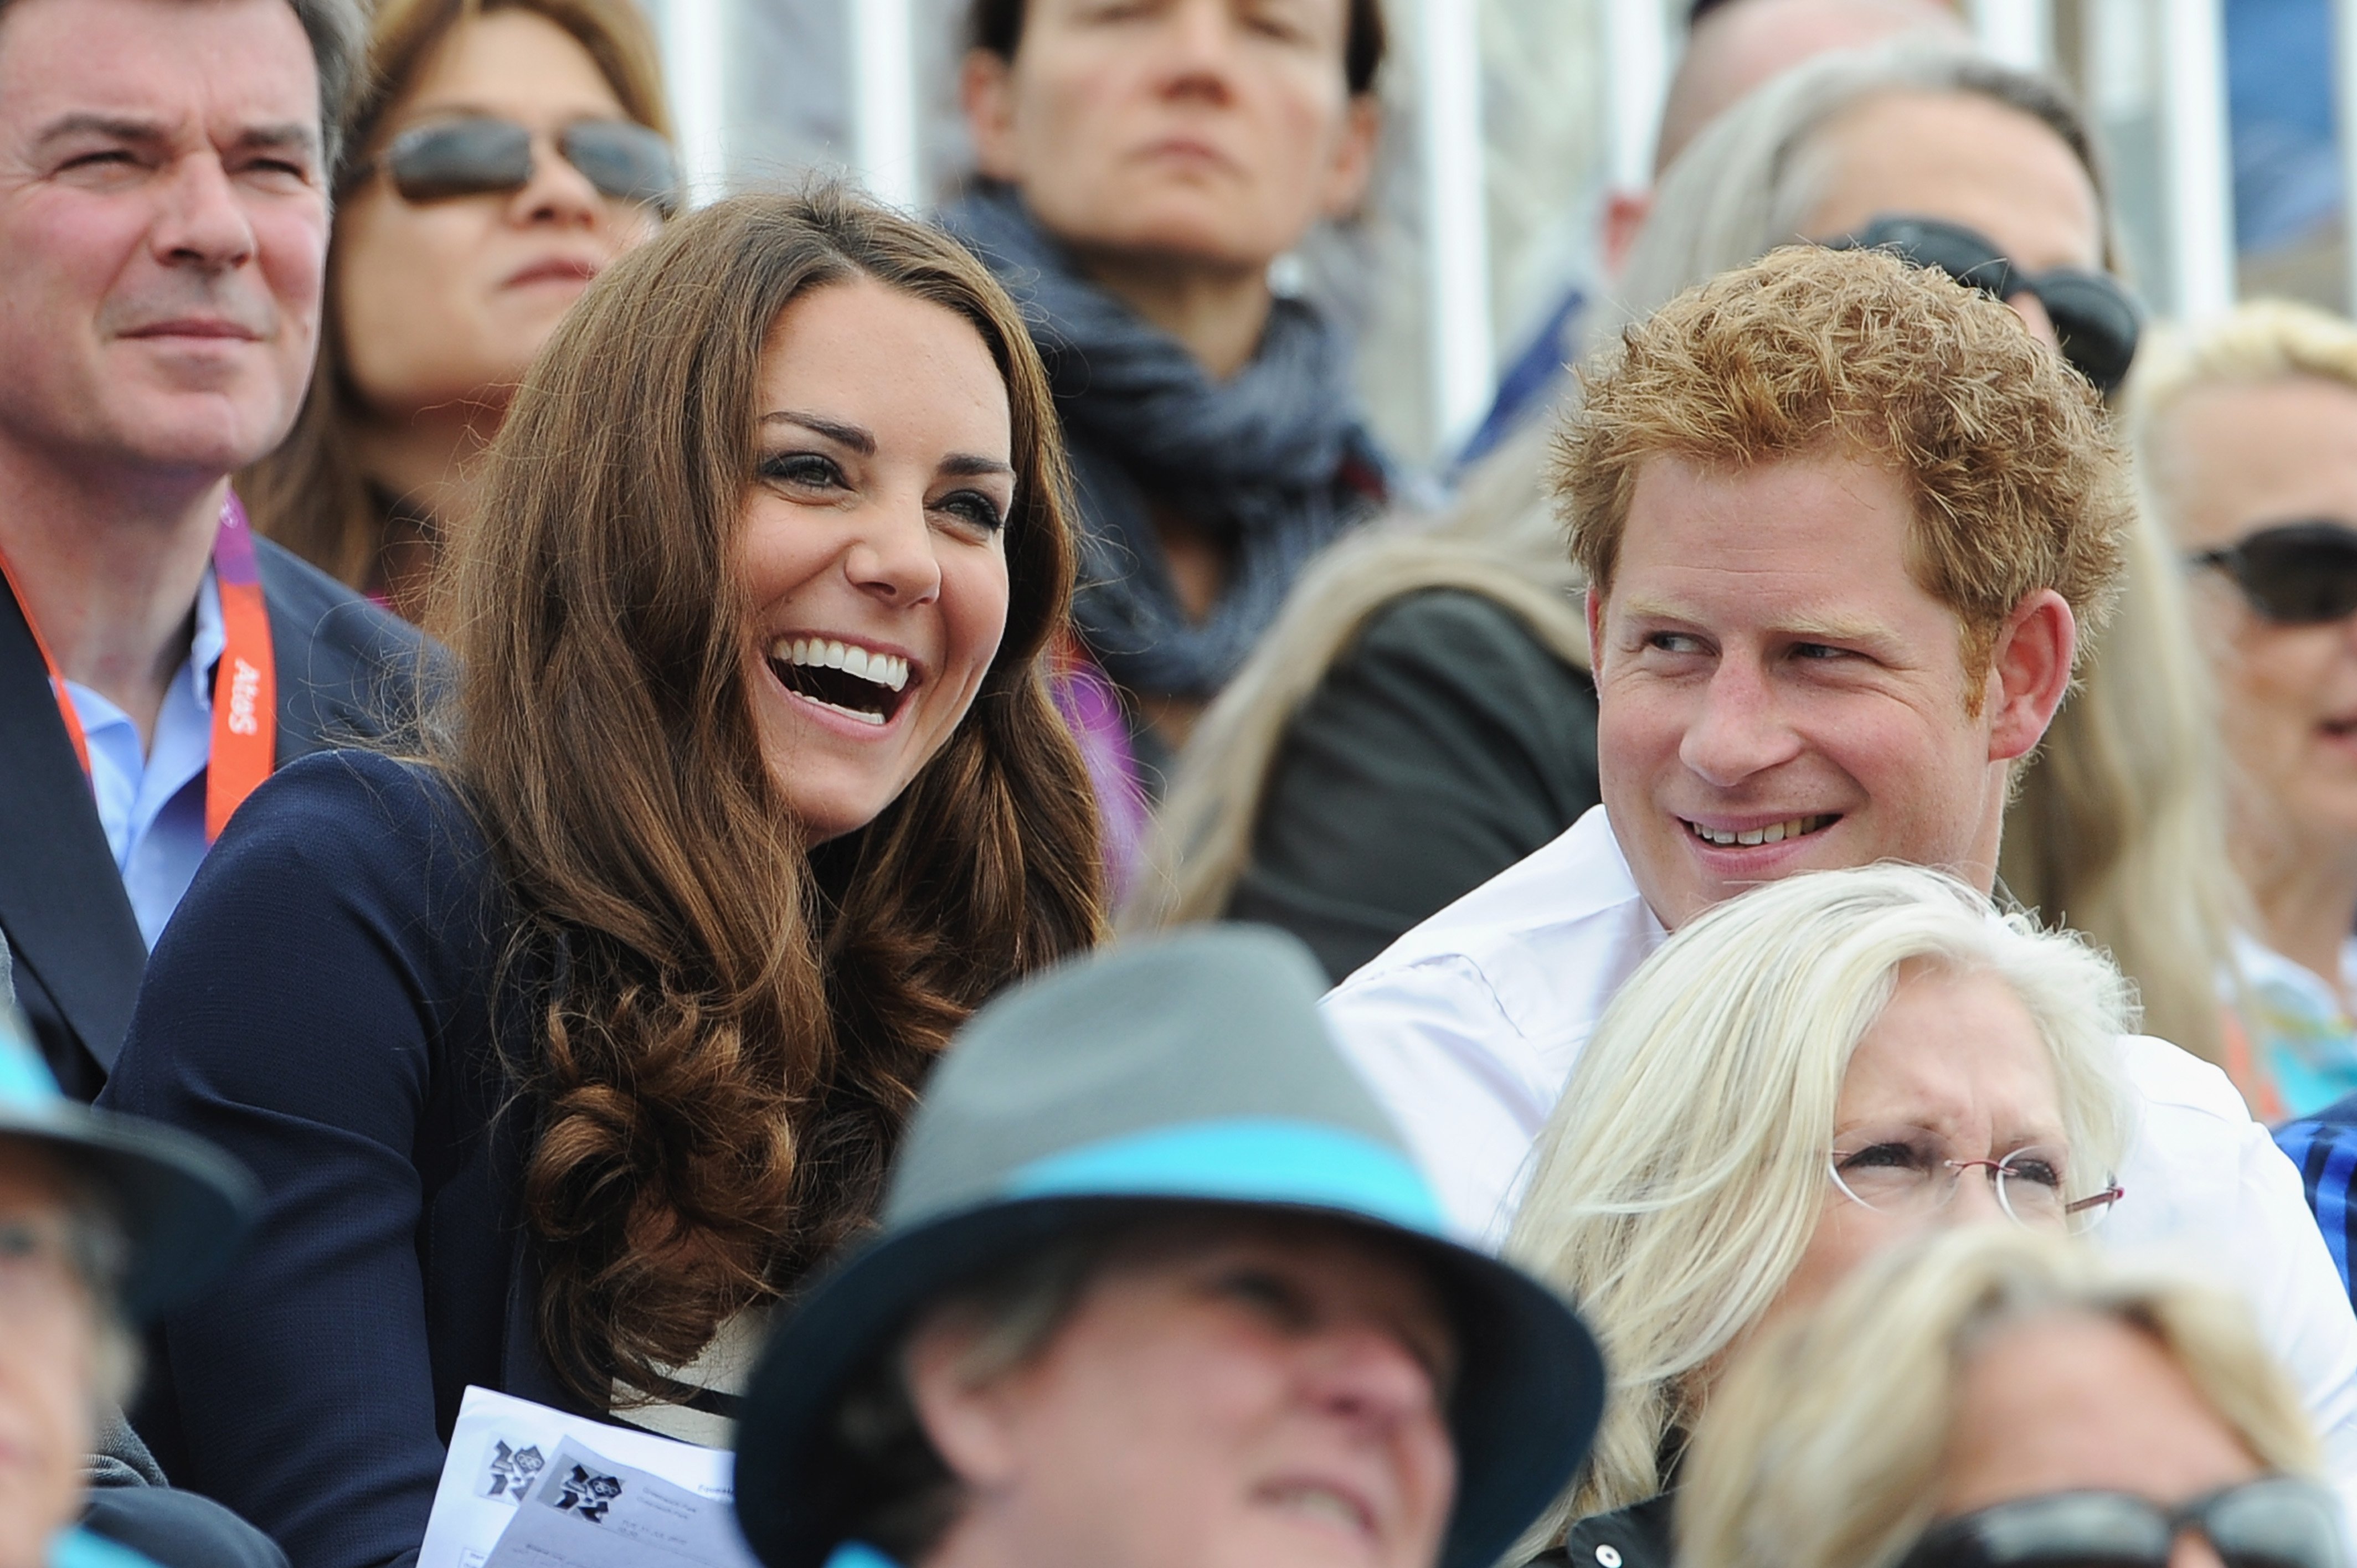 Kate Middleton, Duchess of Cambridge and Prince Harry, Duke of Sussex during the Show Jumping Eventing Equestrian on Day 4 of the London 2012 Olympic Games at Greenwich Park on July 31, 2012 in London, England. / Source: Getty Images